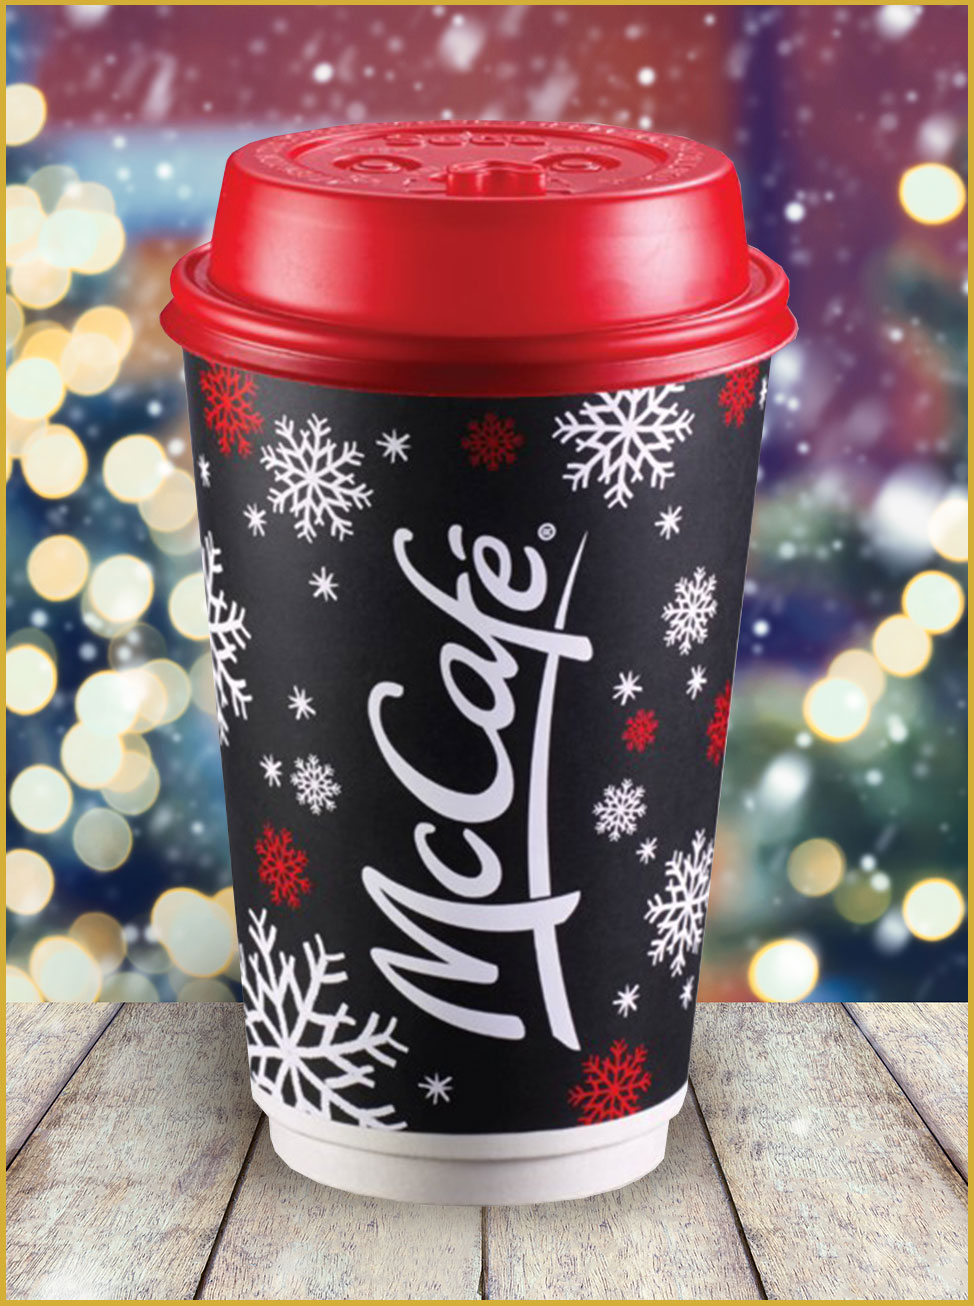 McCafe Holiday Cup for 2017 for Canada